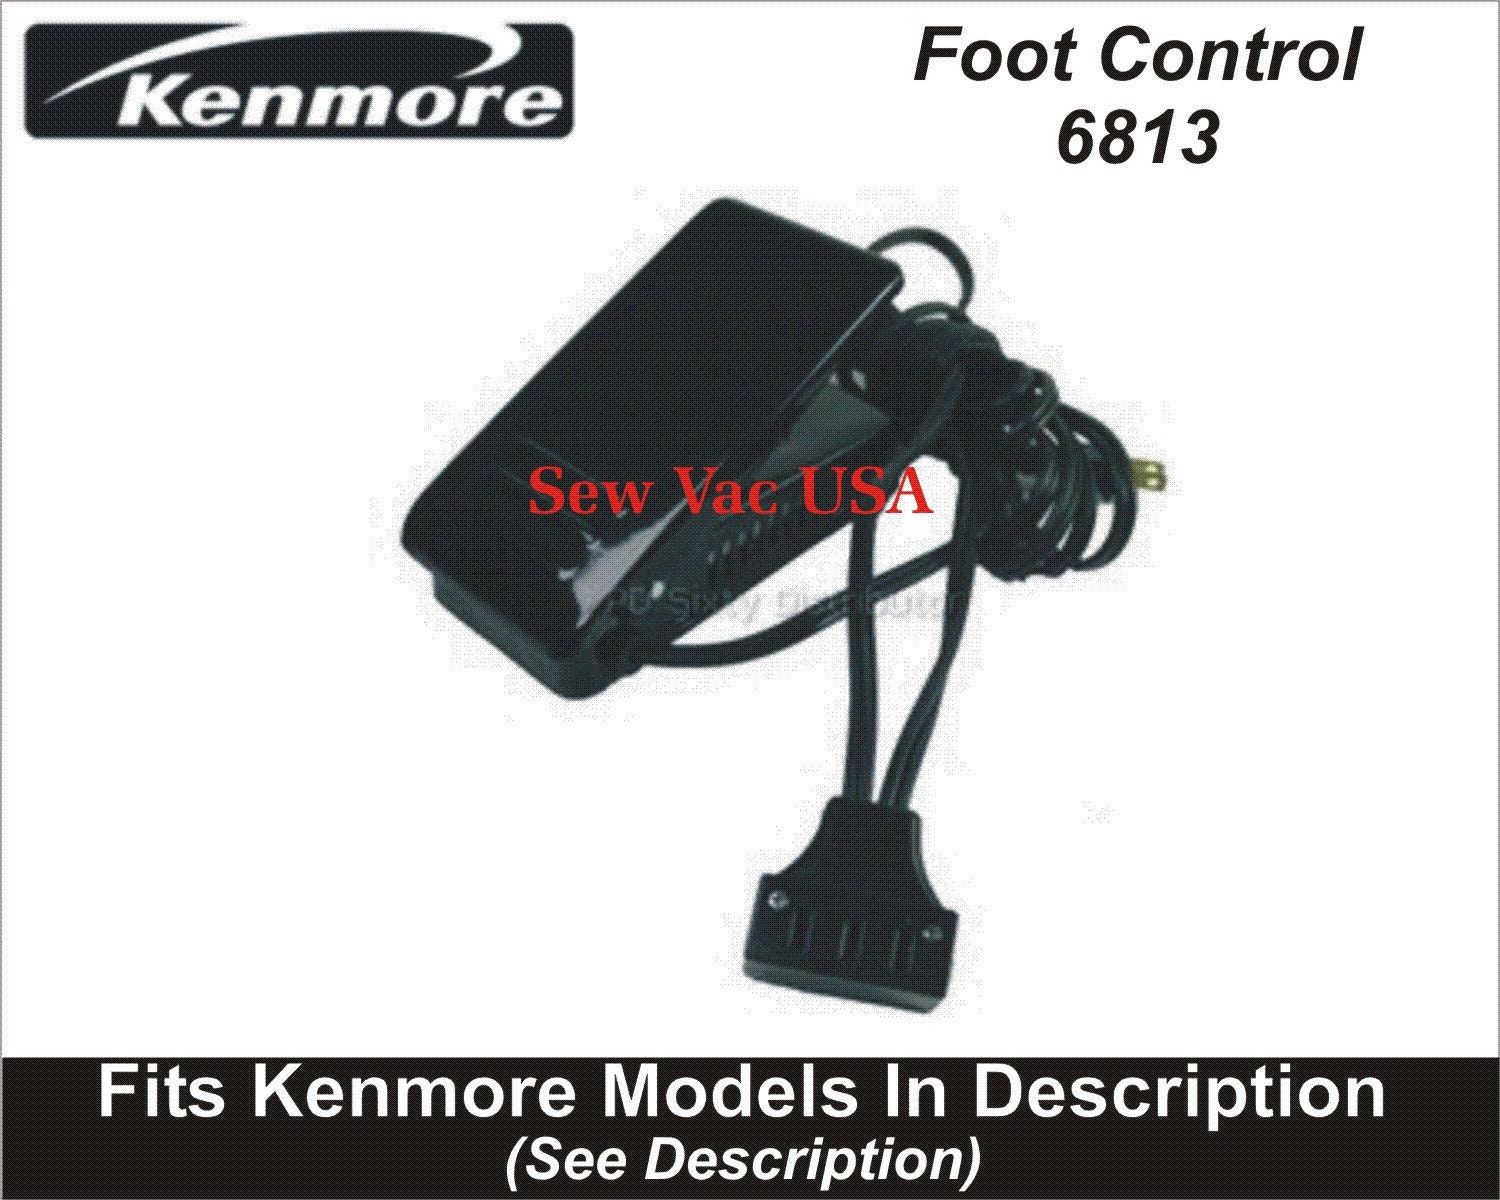 Instructions For Operating the Kenmore Model 117-141 Rotary Sewing Machine.  -- Includes Parts List for Kenmore Rotary Sewing Head Model Number 117.141  + Parts List For 117.552, Roebuck and Co Sears